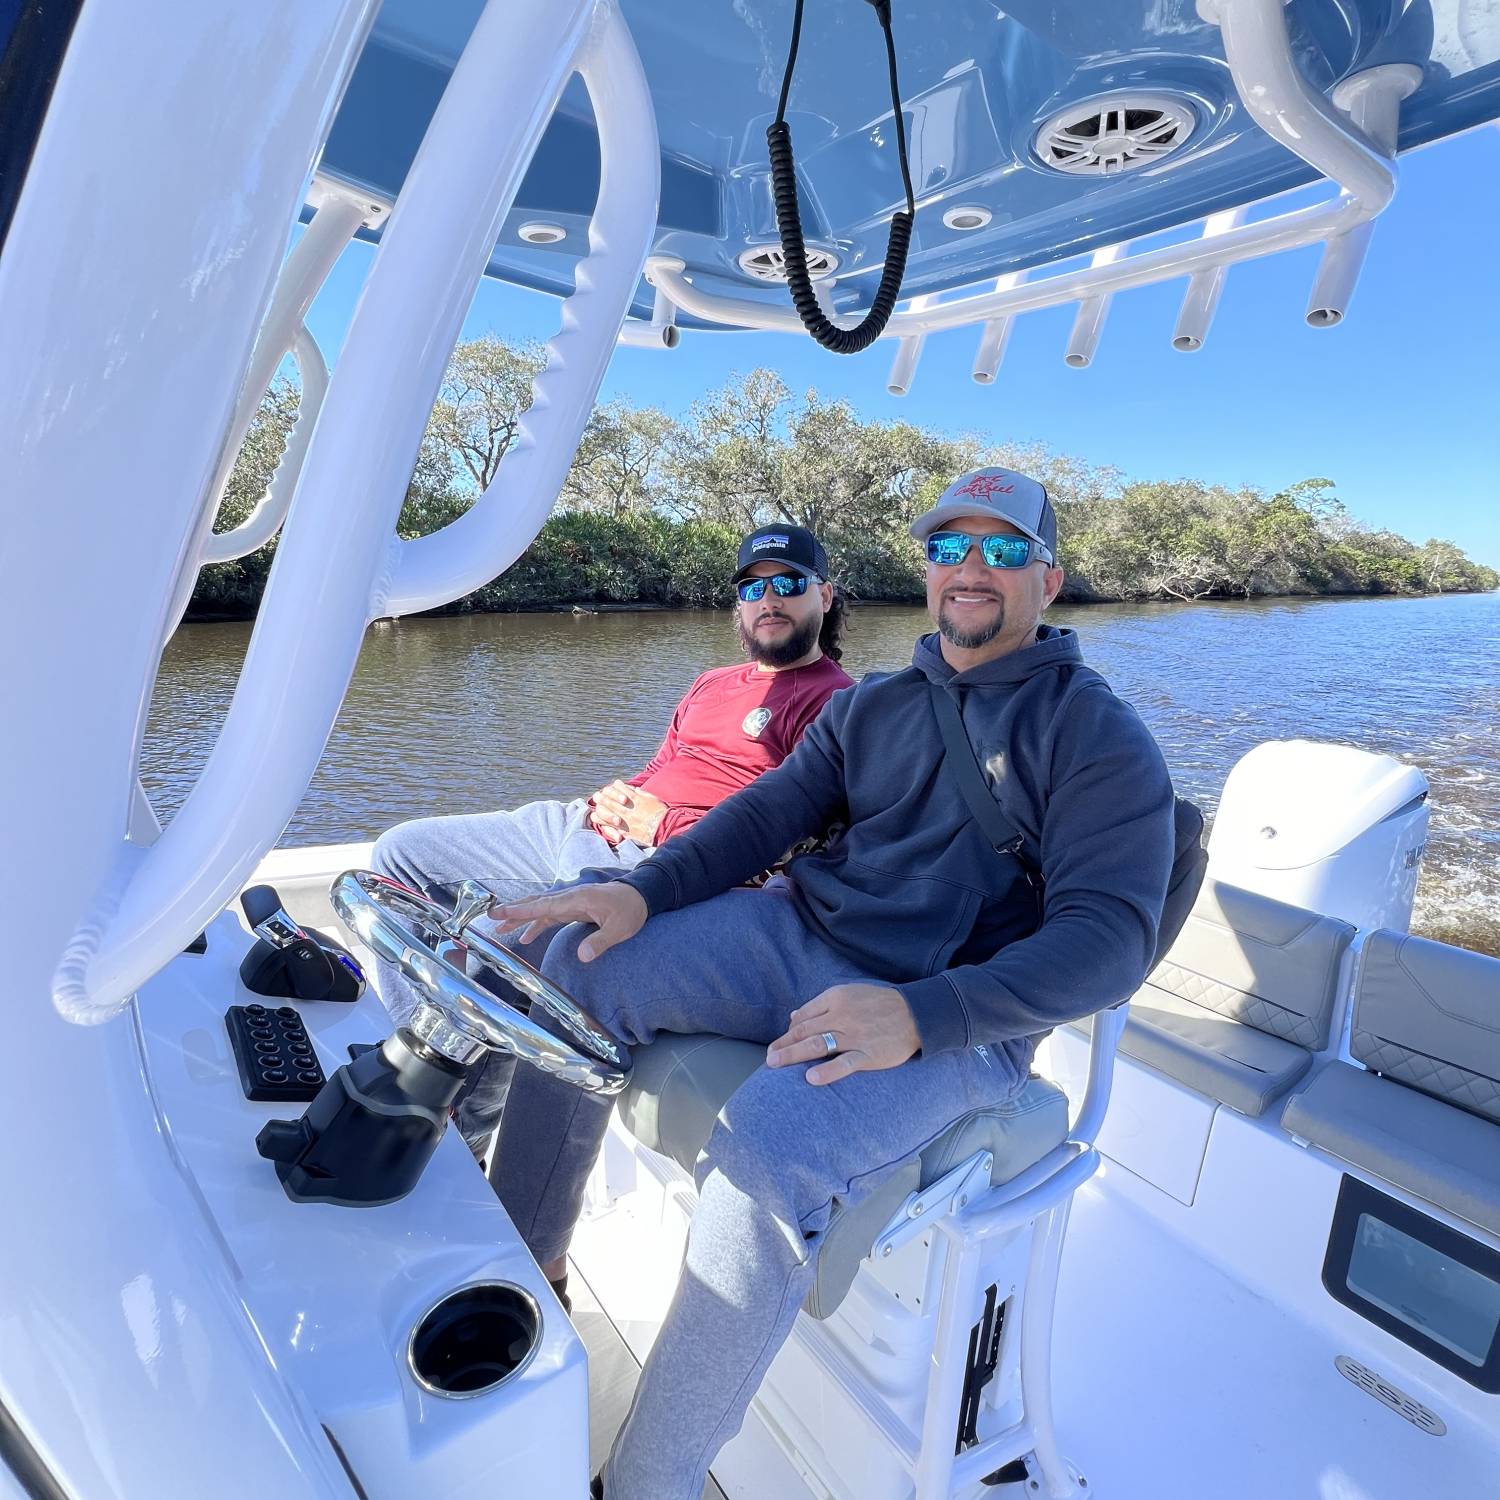 Title: A day on the River - On board their Sportsman Heritage 231 Center Console - Location: Saint Lucie River. Participating in the Photo Contest #SportsmanJanuary2024